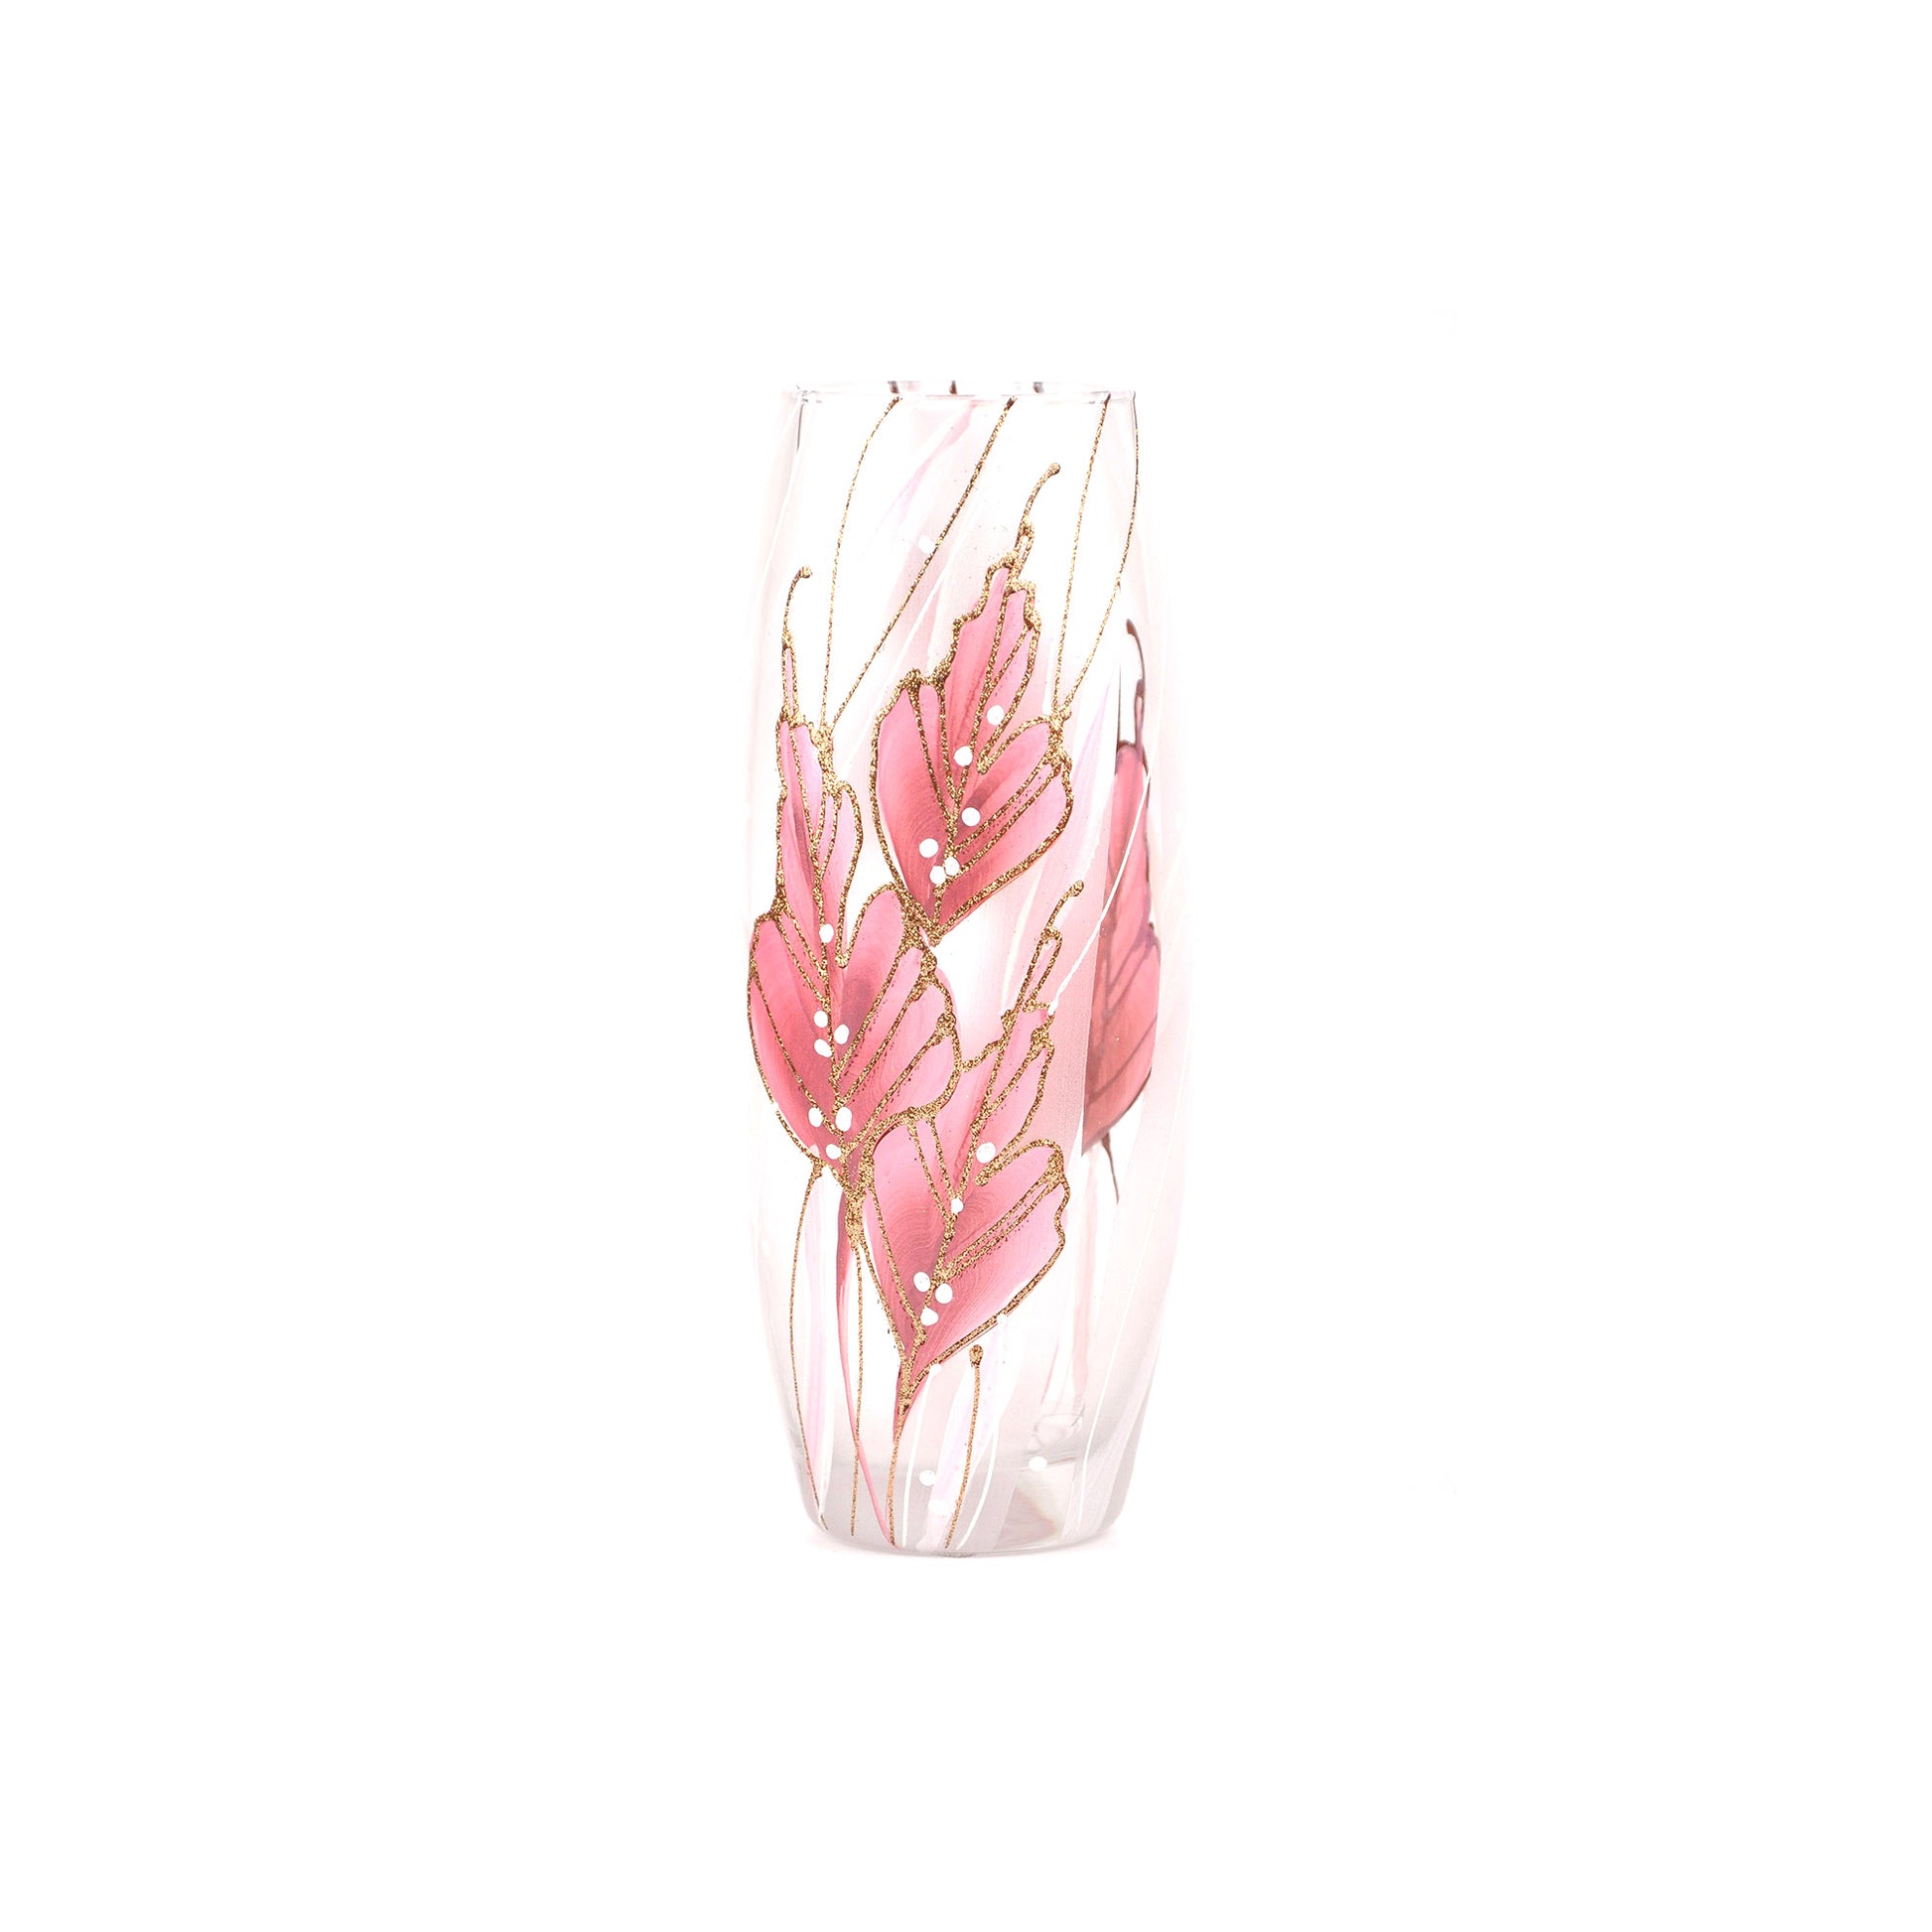 Pink Art of Romantic Vases | Hand Painted Romantic Vases | Flower Ball and Rose Petals Vase | Gadgets Angels